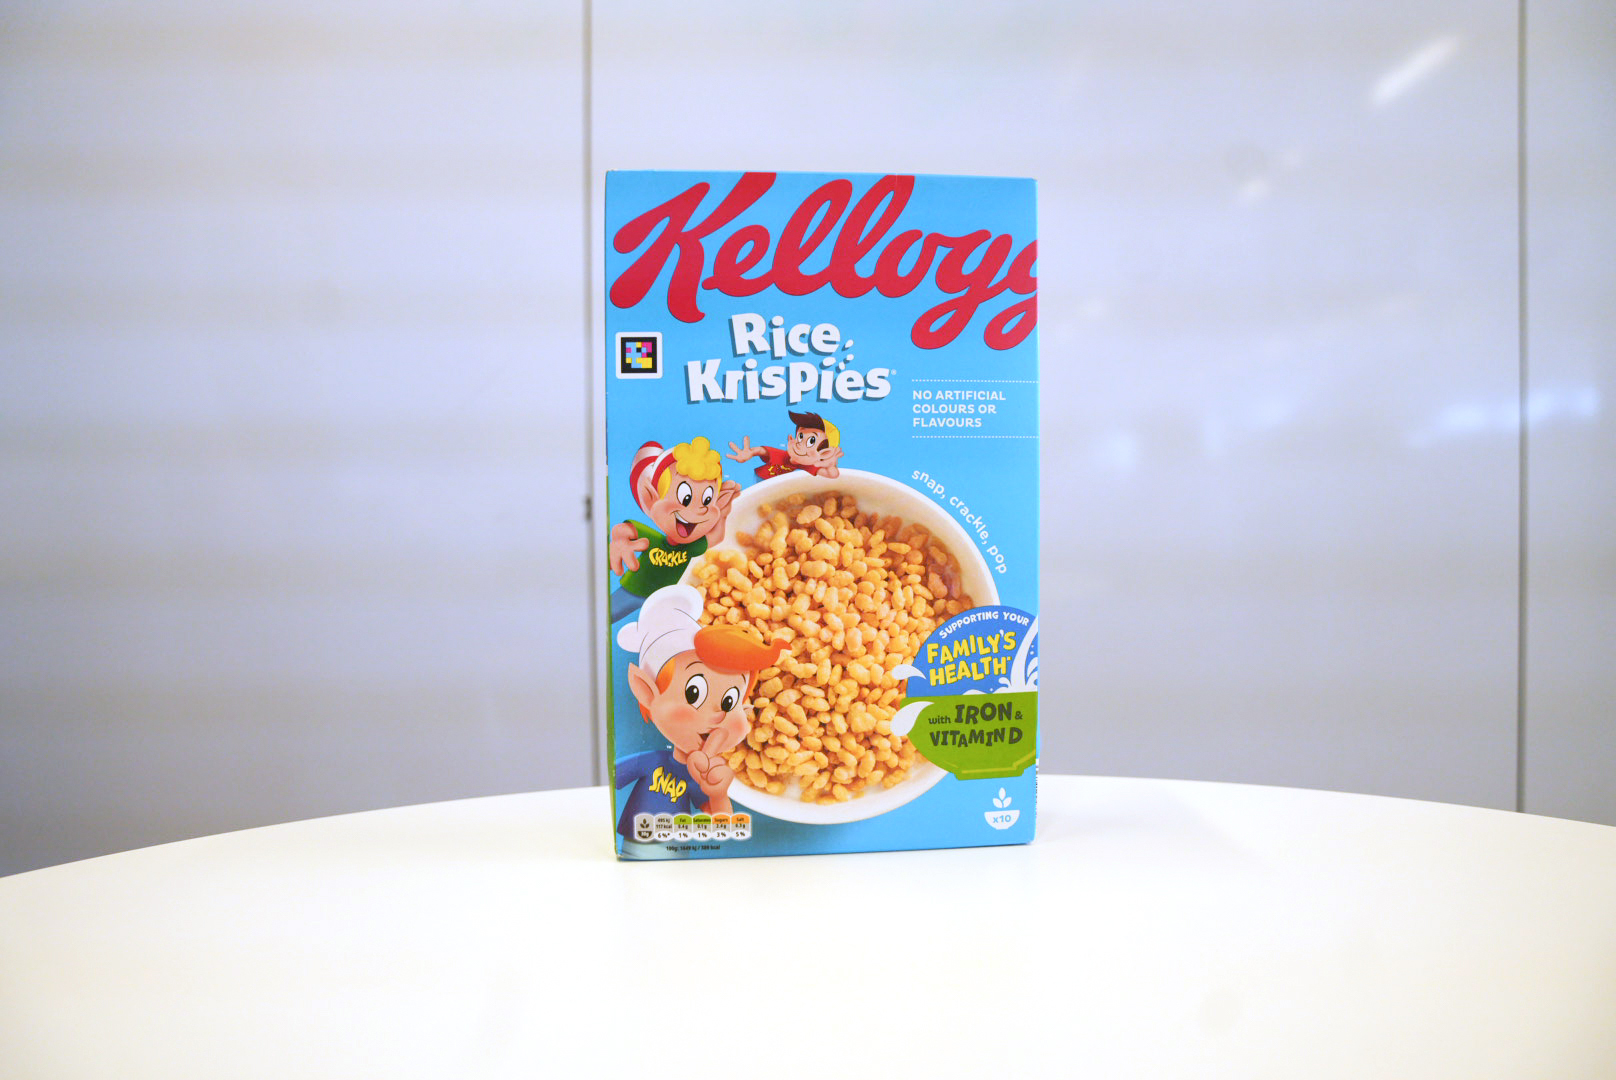 The Kellogg's Rice Krispies shocked me in terms of flavour and texture